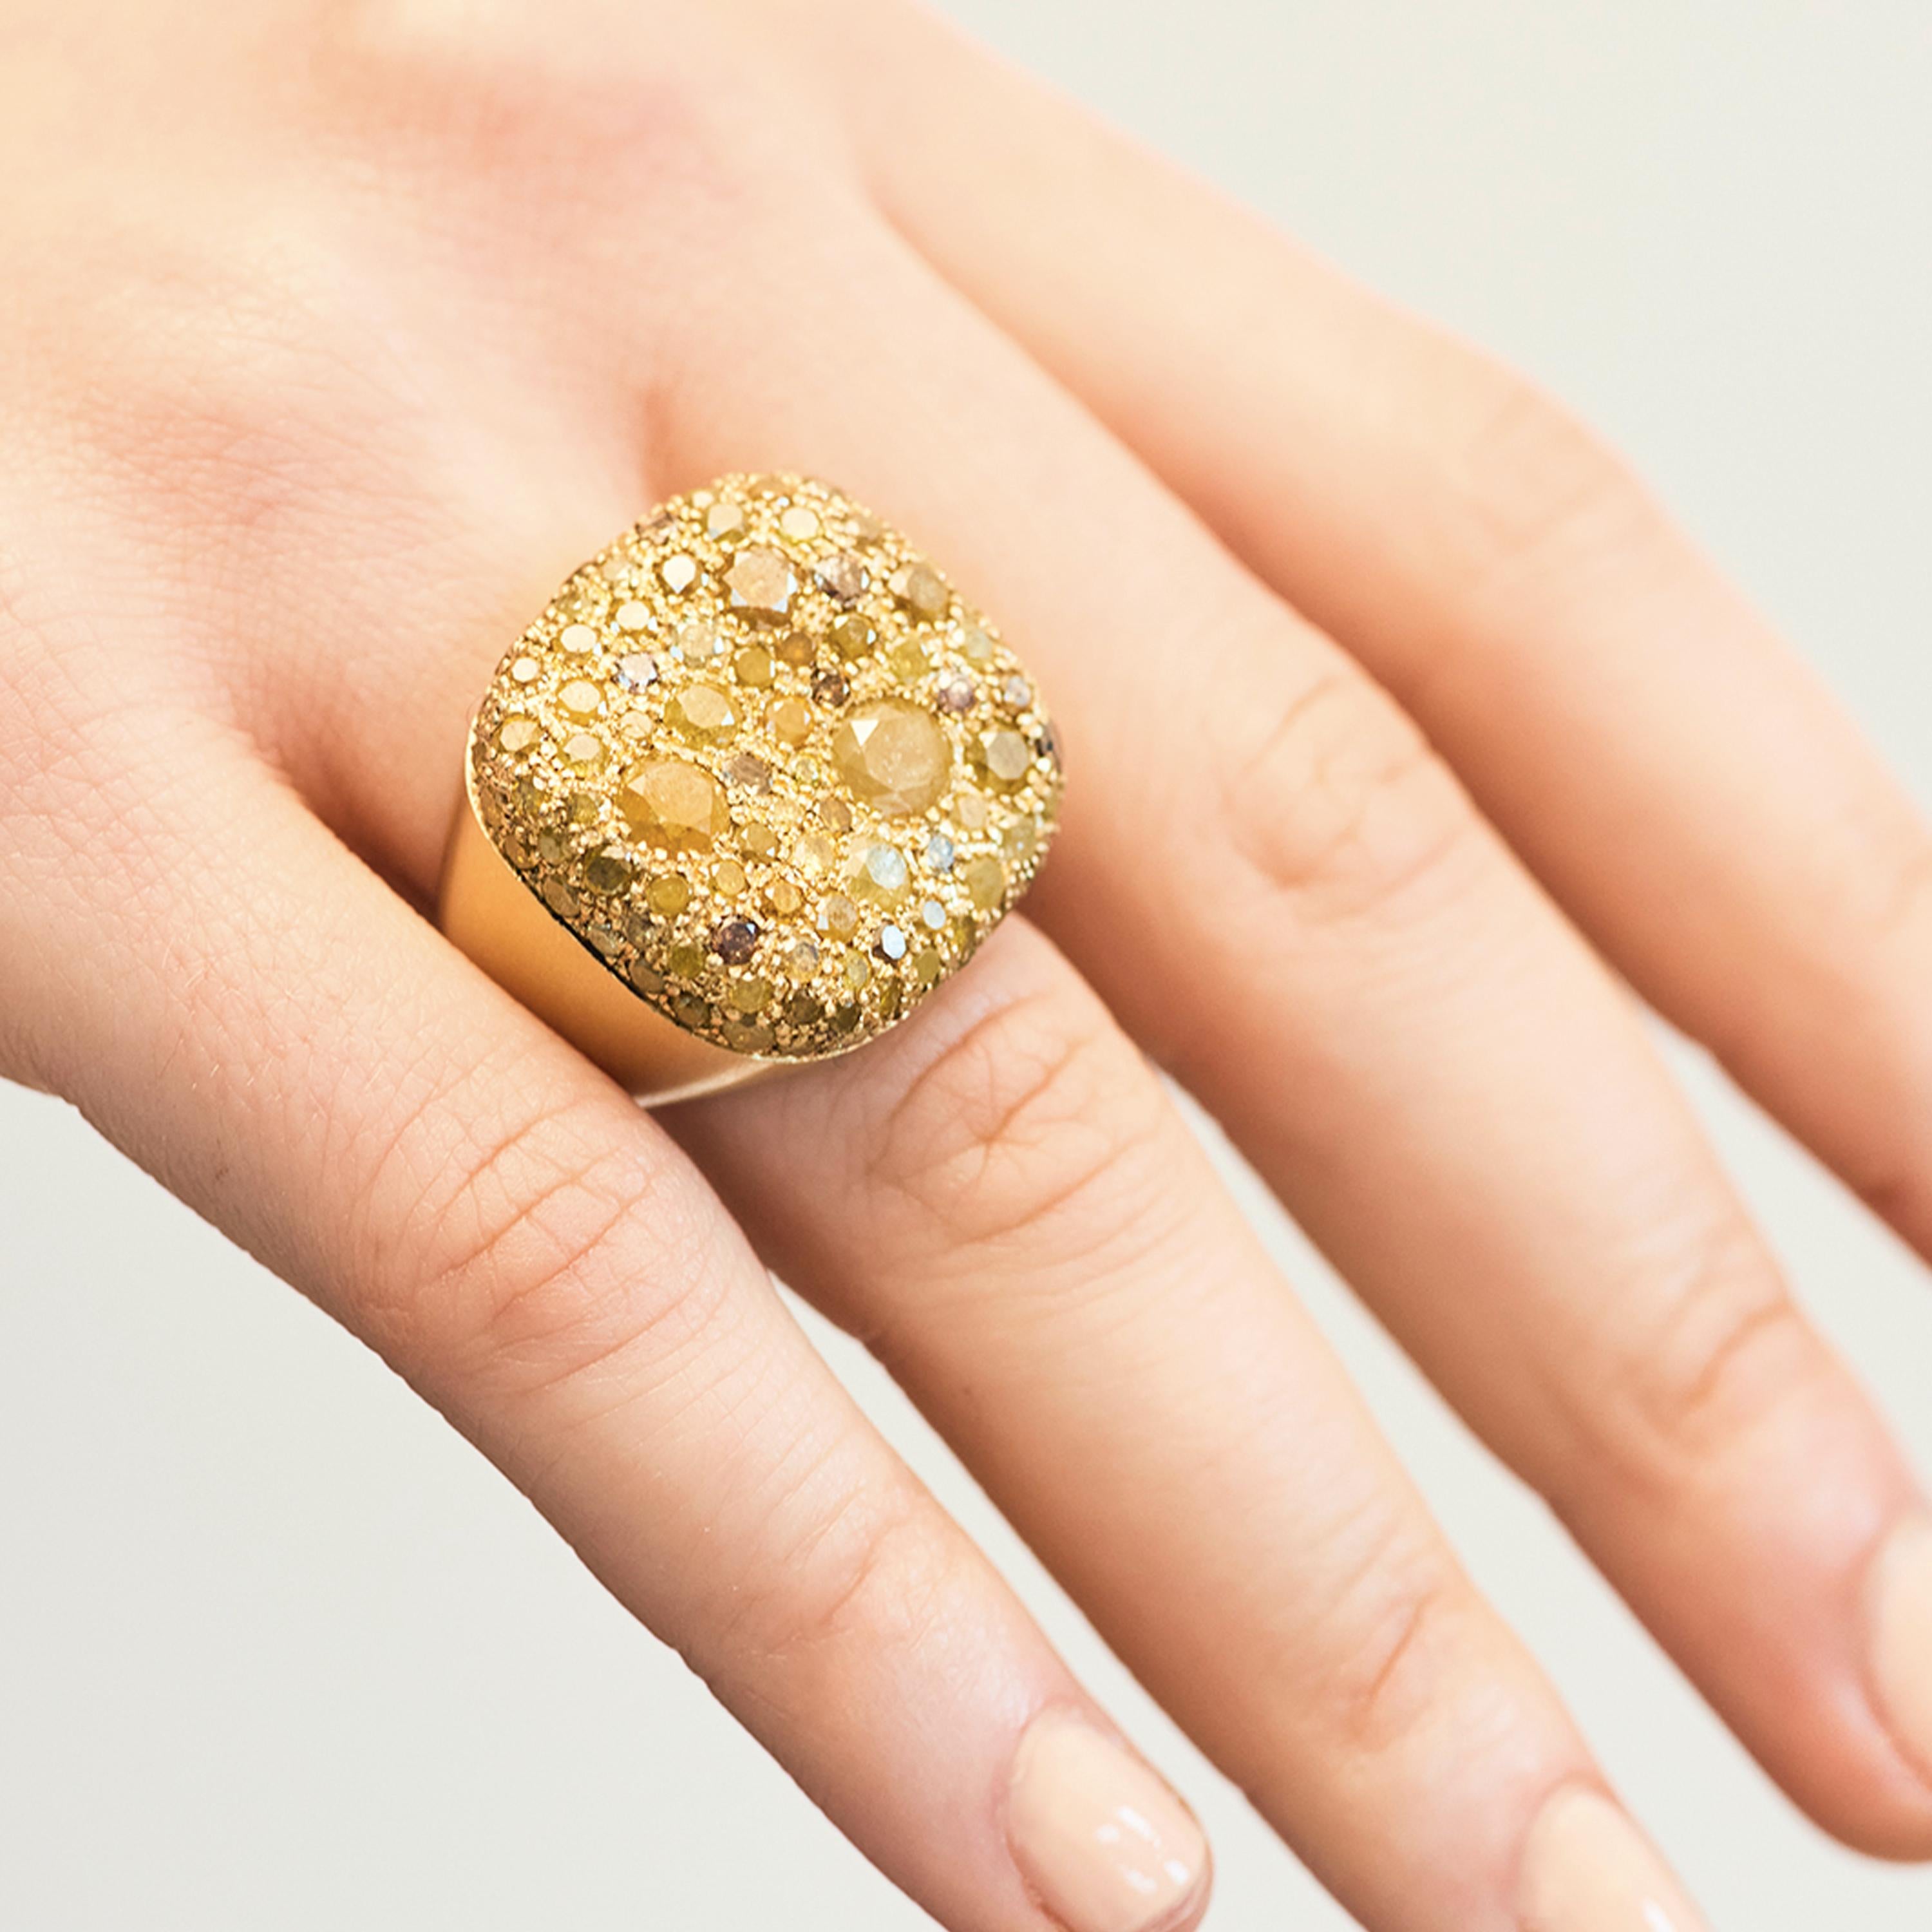 Nada Ghazal's Malak Icy Special Round Ring is crafted from 18 karat yellow gold. Its tactile form is complimented by a brushed surface finish. Nada presents a bold use of colour decorating the piece with white diamonds (6.25cts).

While Nada